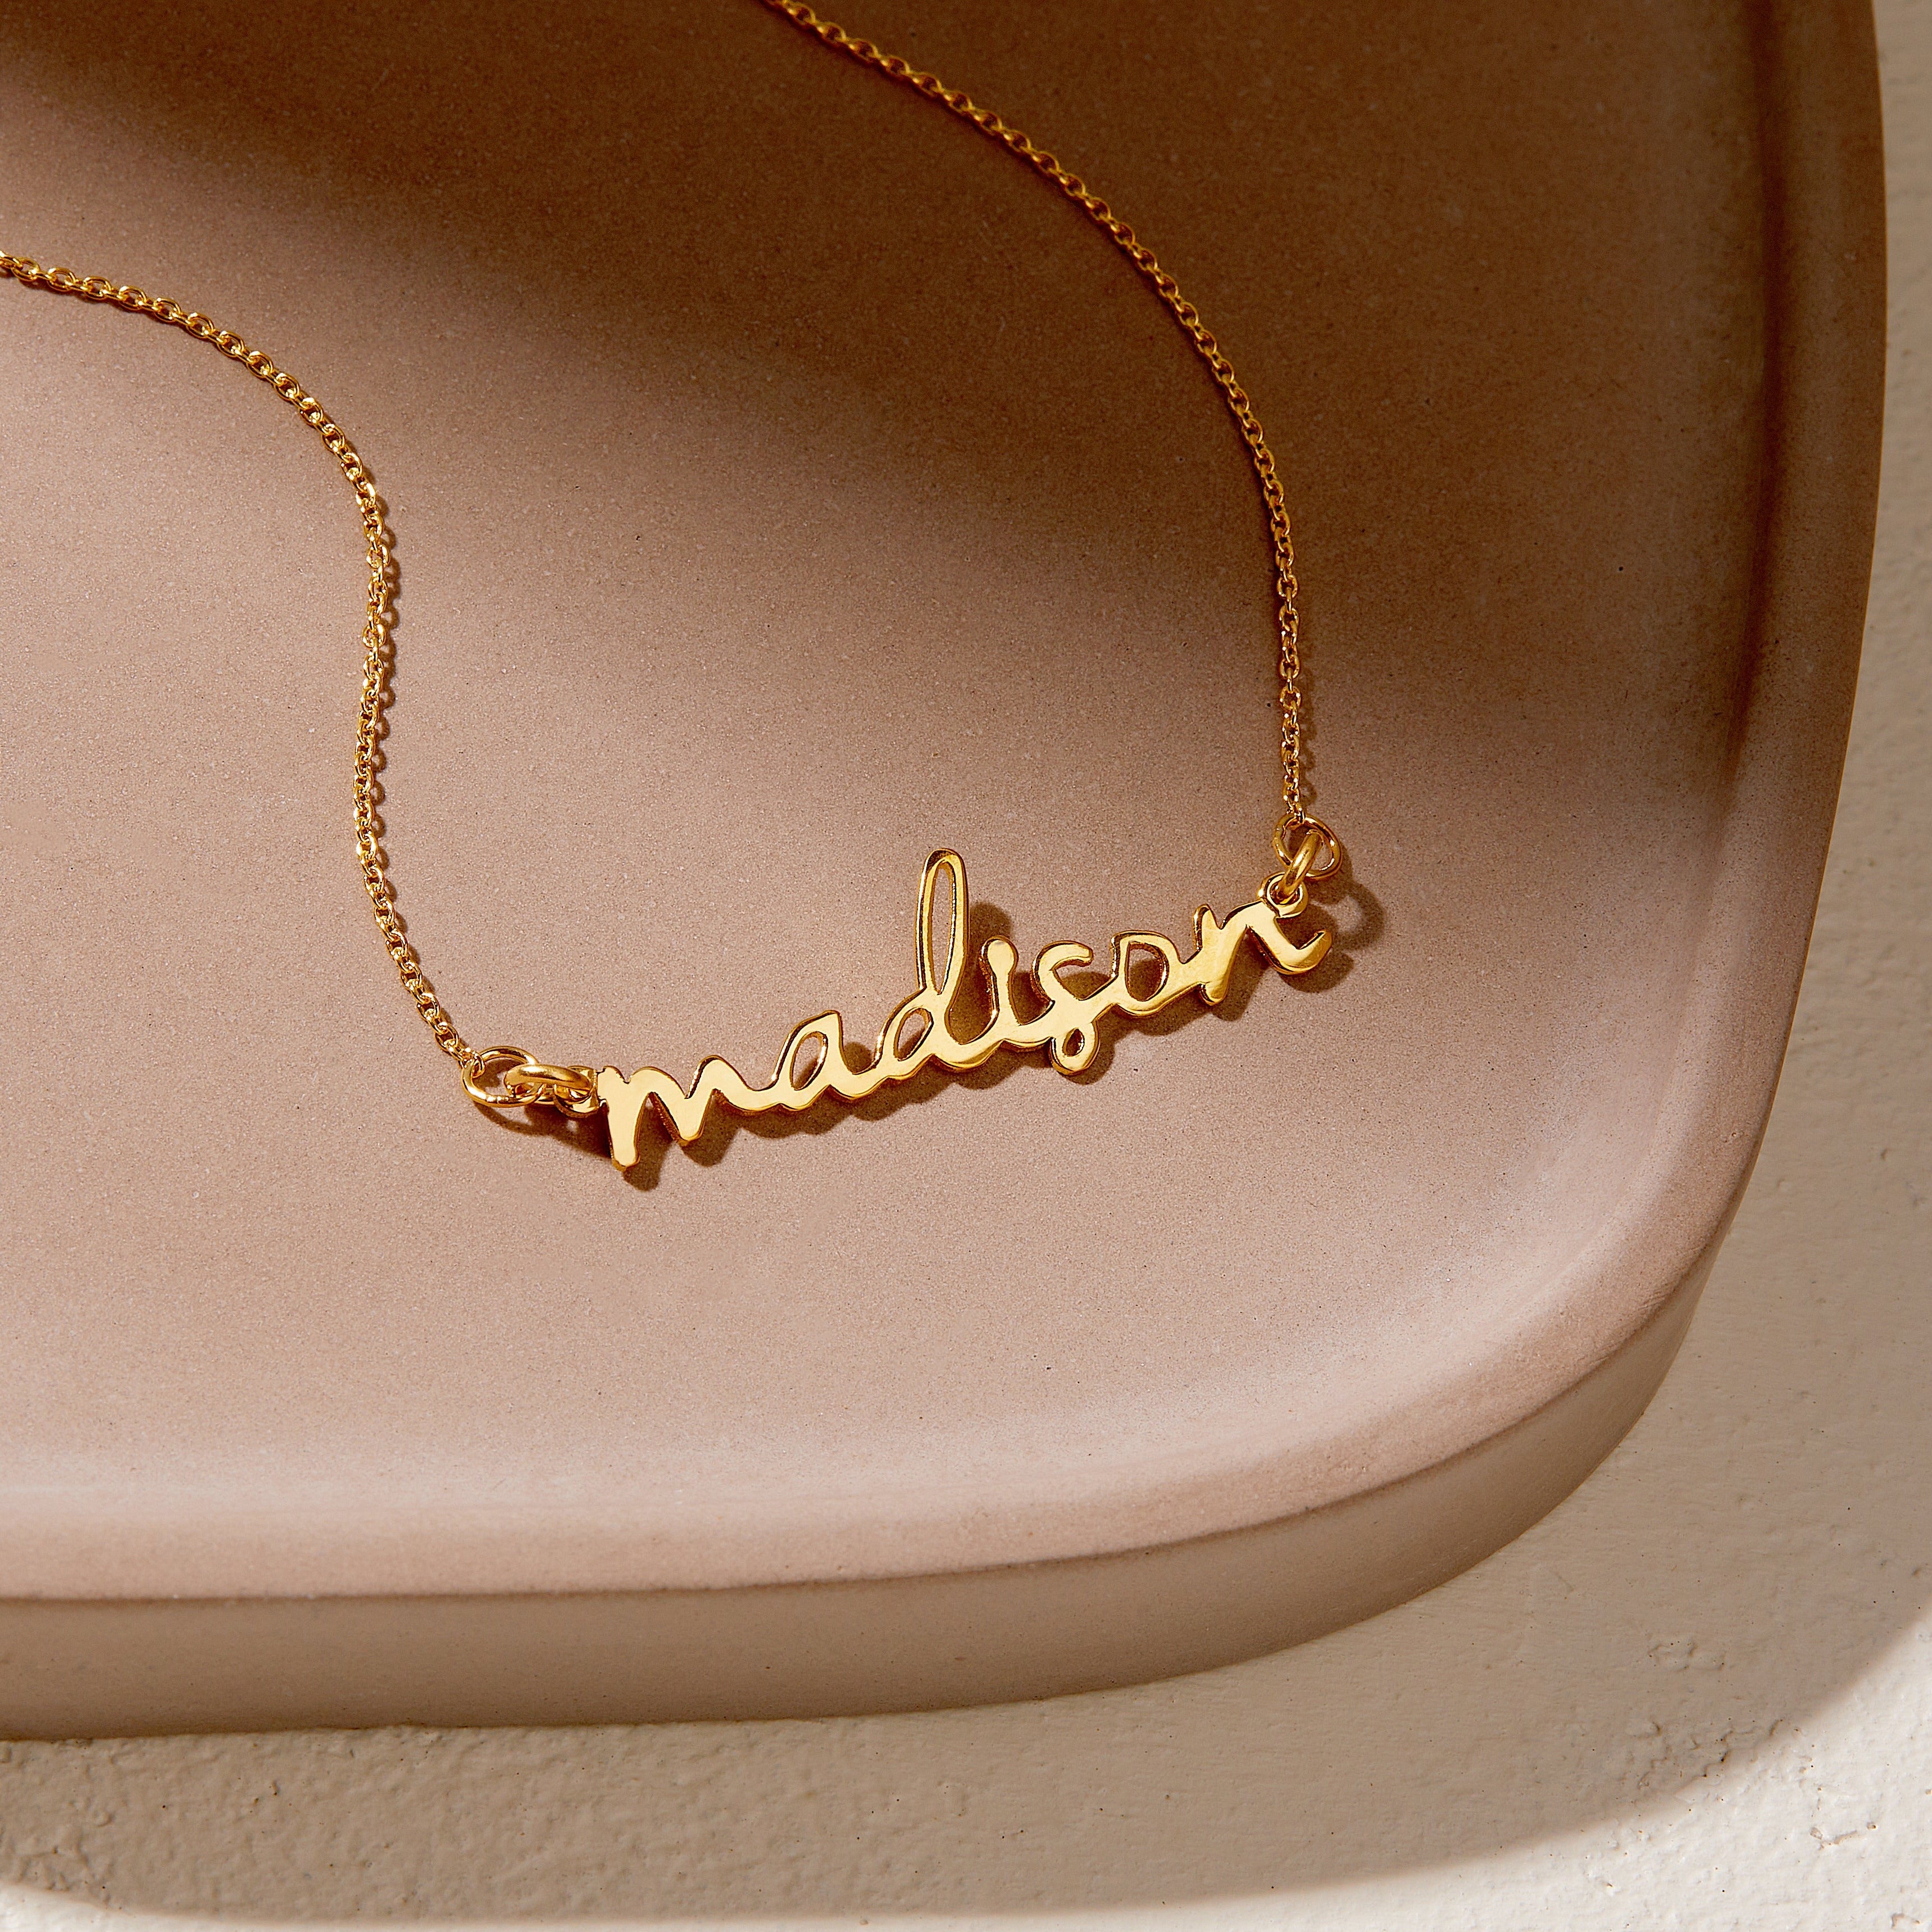 How The Nameplate Necklace Has Become A Symbol Of Empowerment